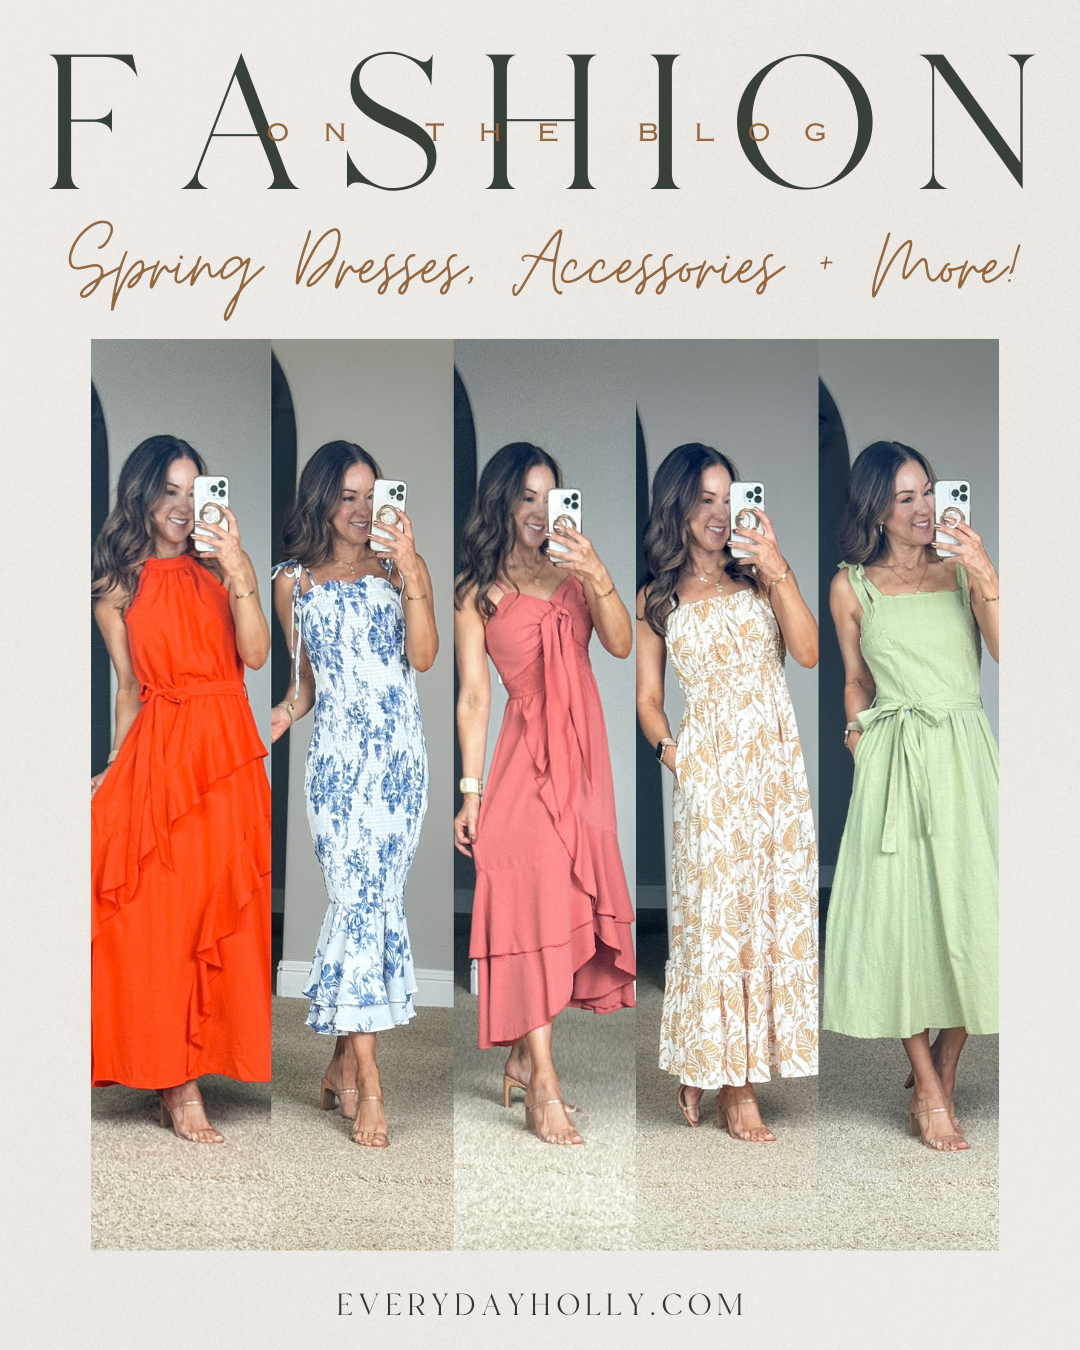 Spring into the season with these must-see dresses, accessories, and more | spring, spring fashion, spring dress, spring dresses, maxi dress, 